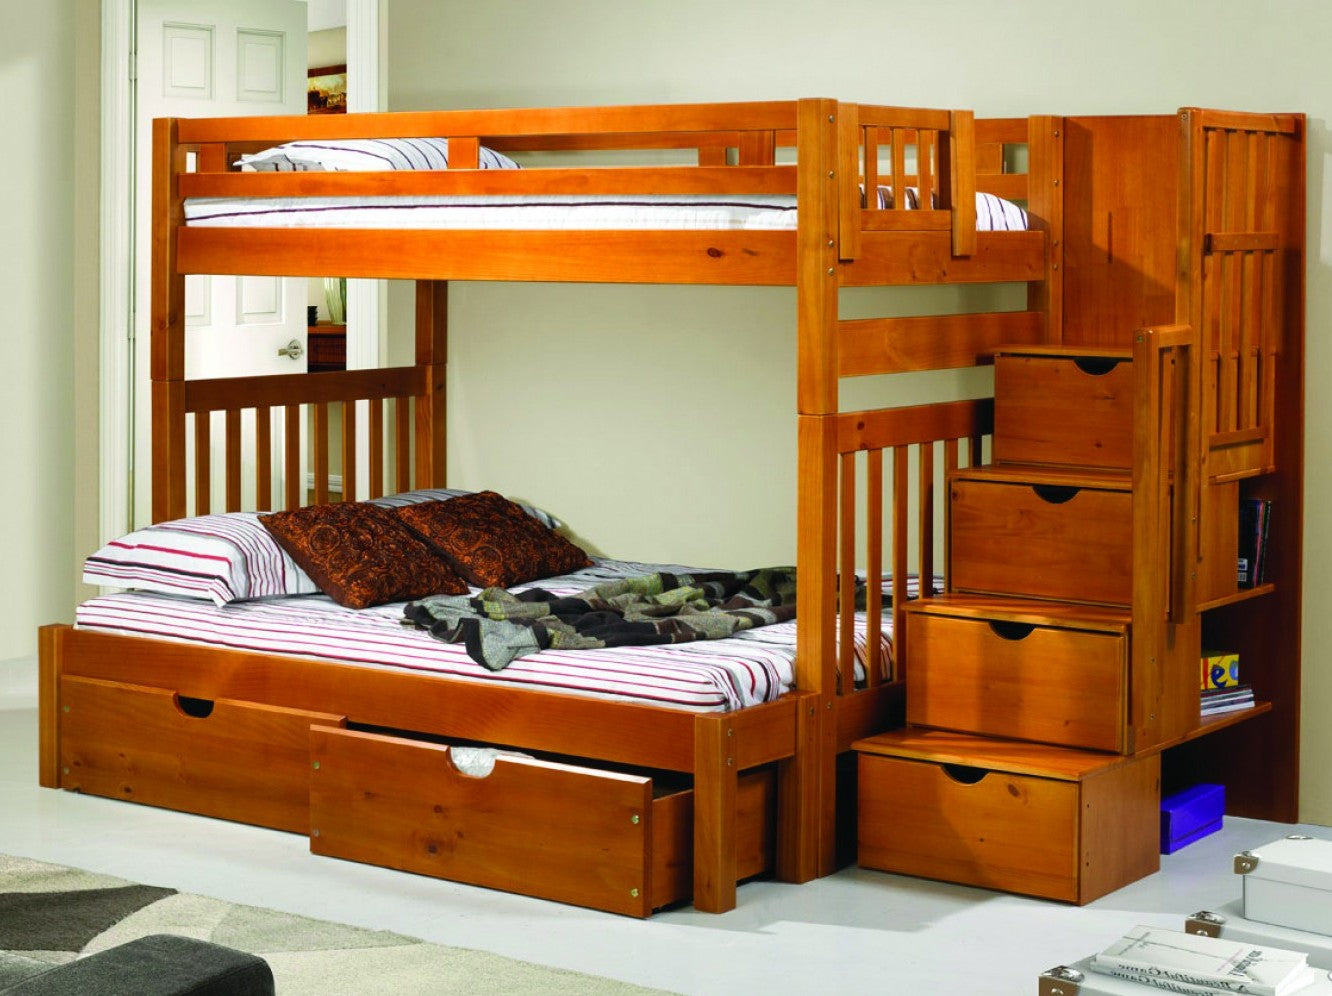 WEEKLY or MONTHLY. Tall Twin/Full Mission Stairway Bunkbed With Staircase Storage Under Each Step